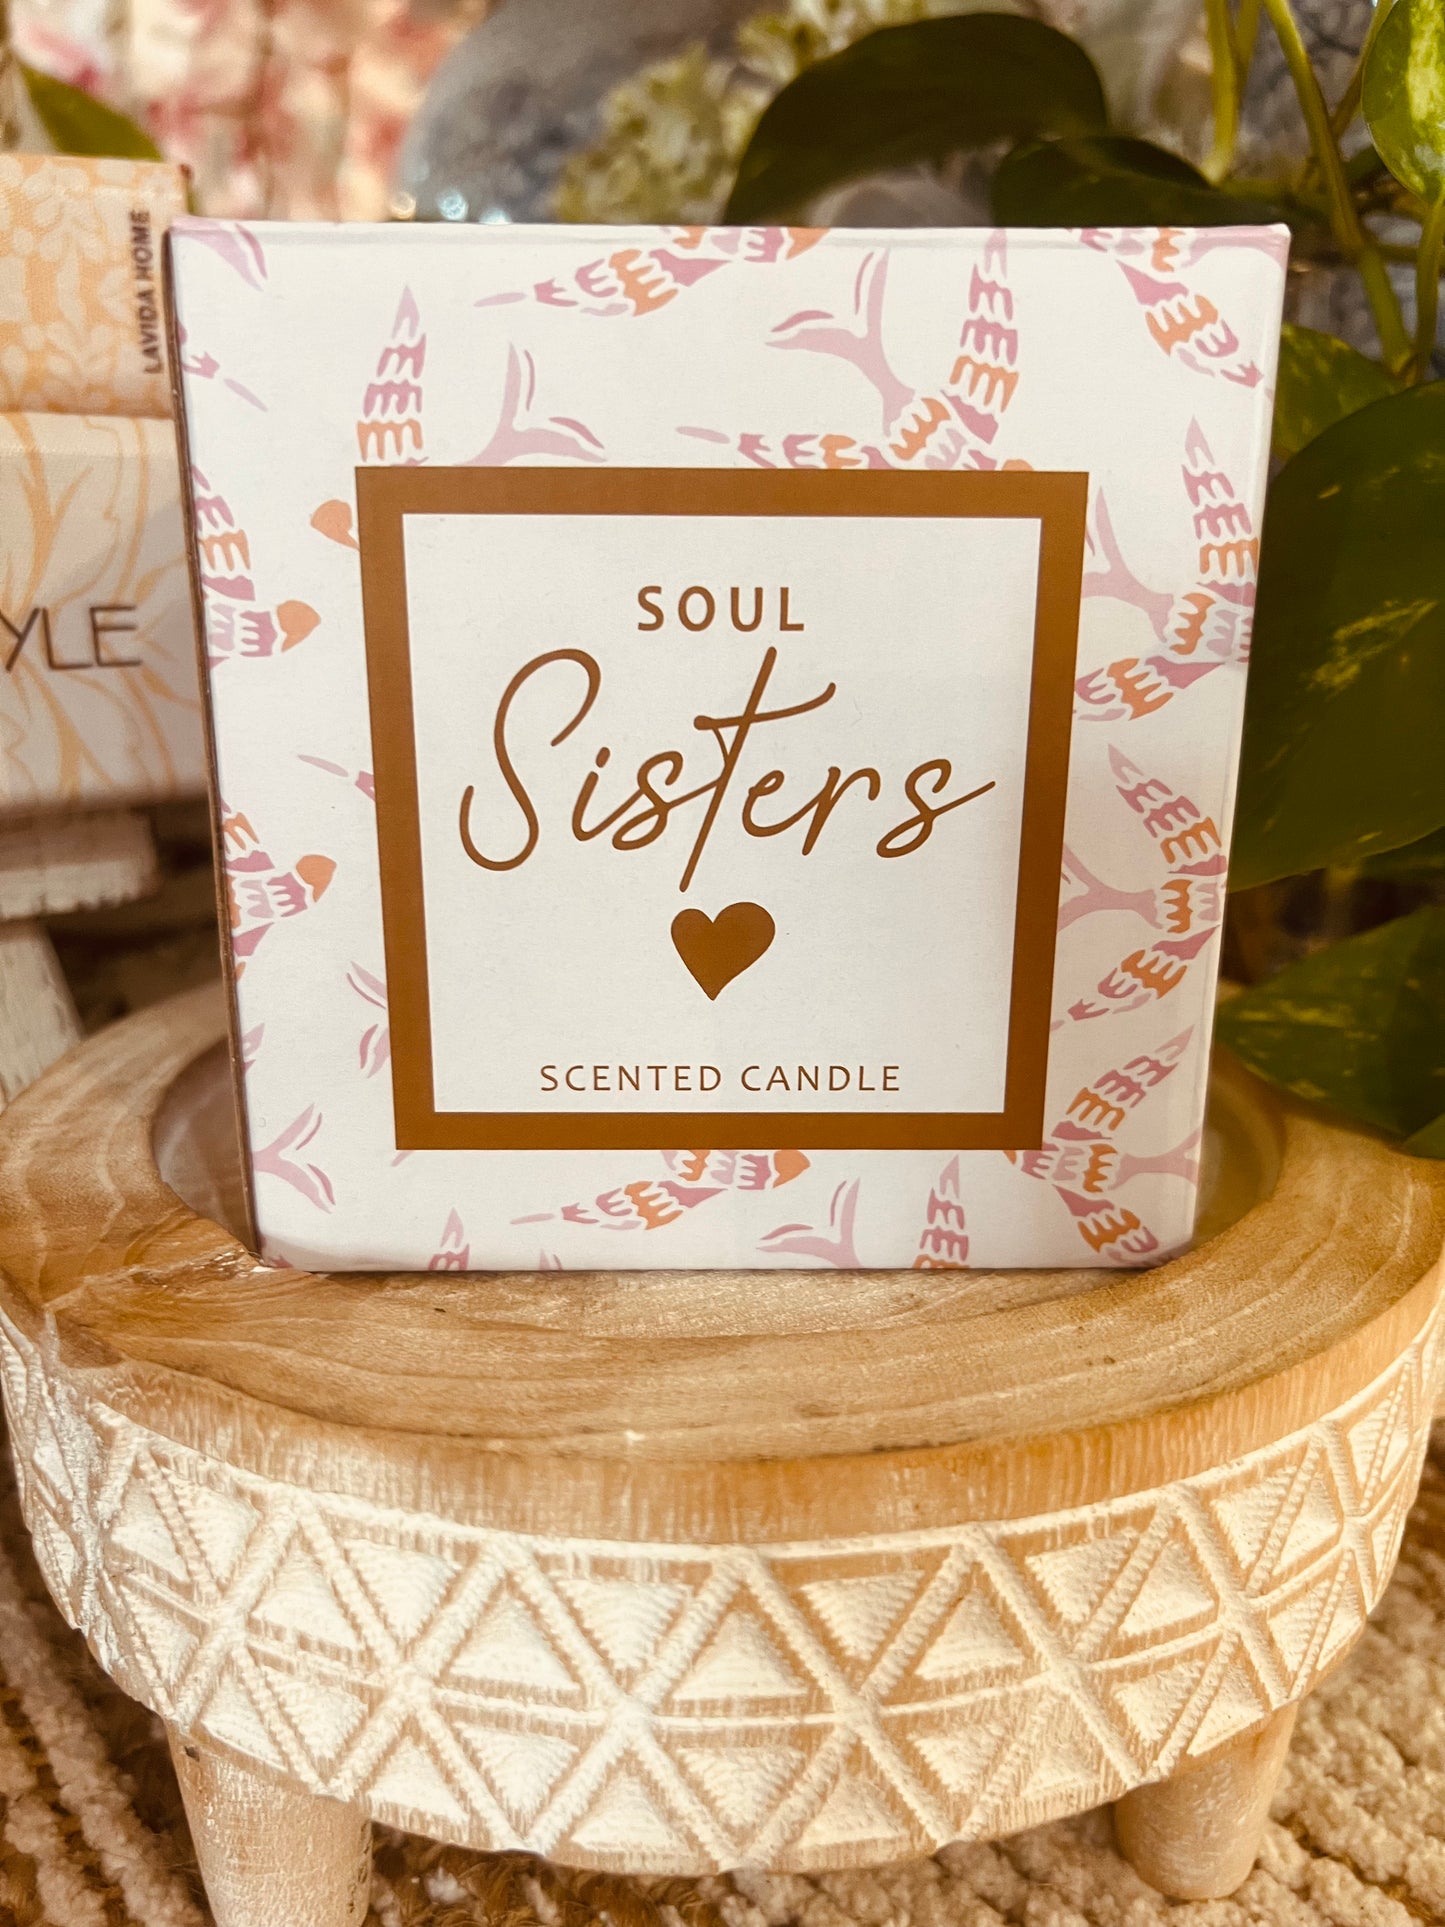 Soul Sisters Scented Candle